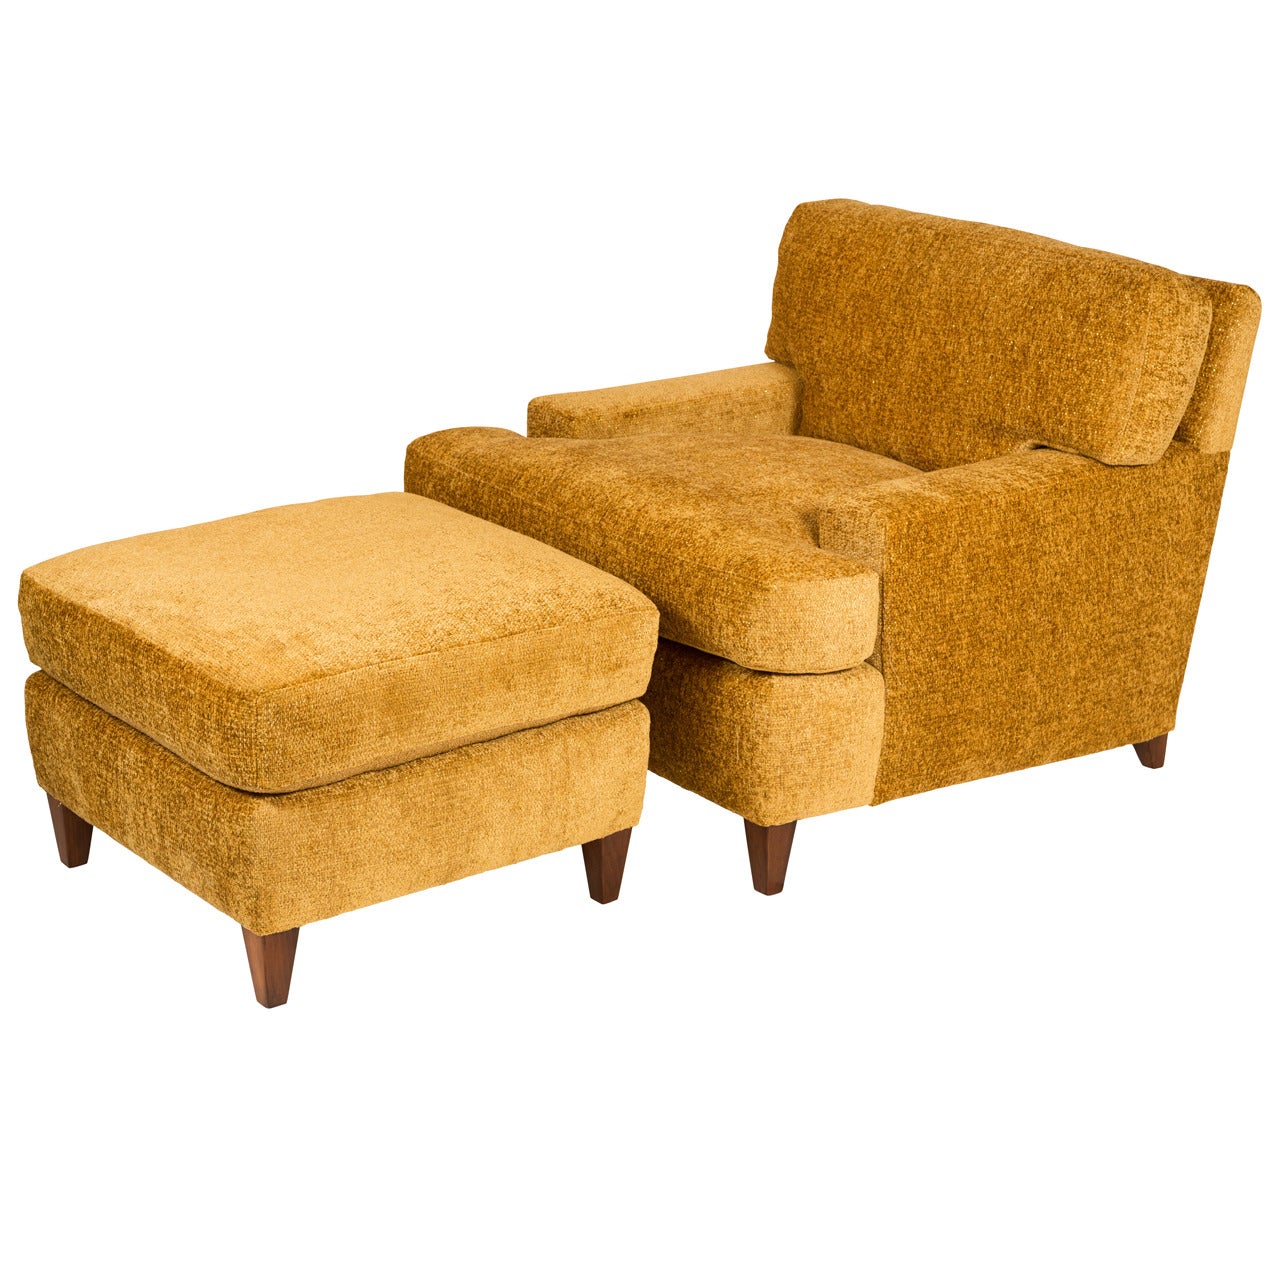 Seniah Club Chair and Ottoman by Billy Haines